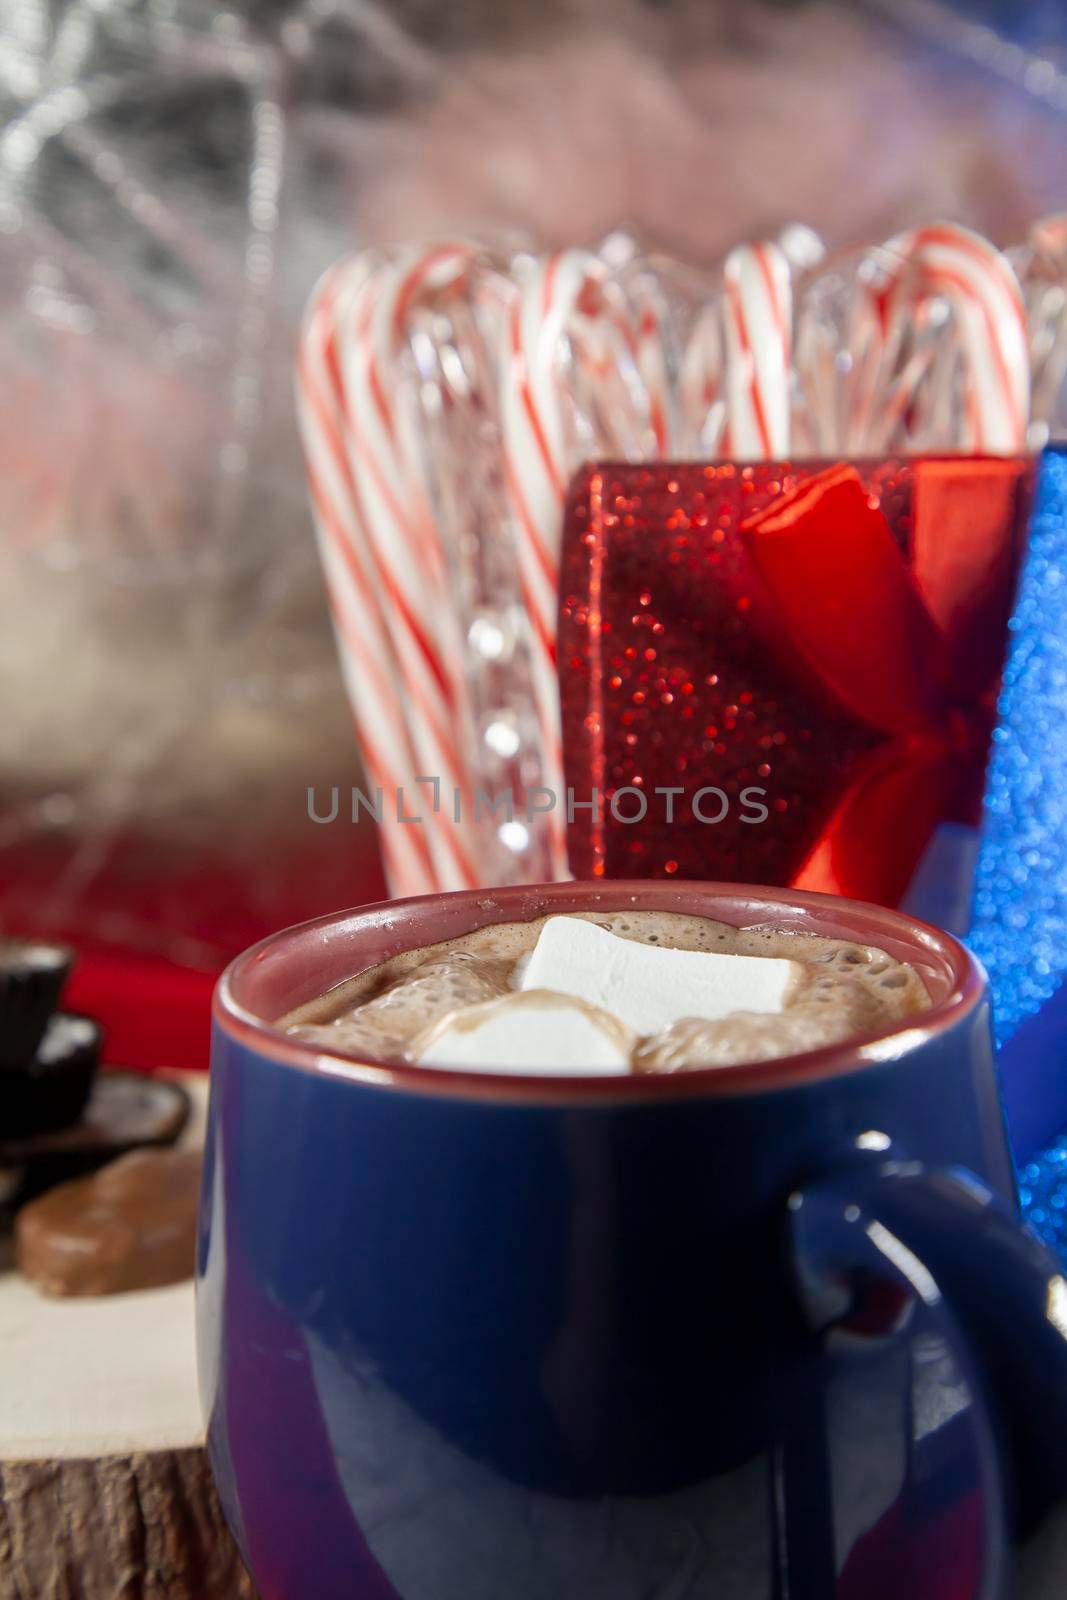 Blue and red mug filled with hot chocolate and two marshmallows, with chocolates on a wooden stump and candy canes and red and blue presents in the background